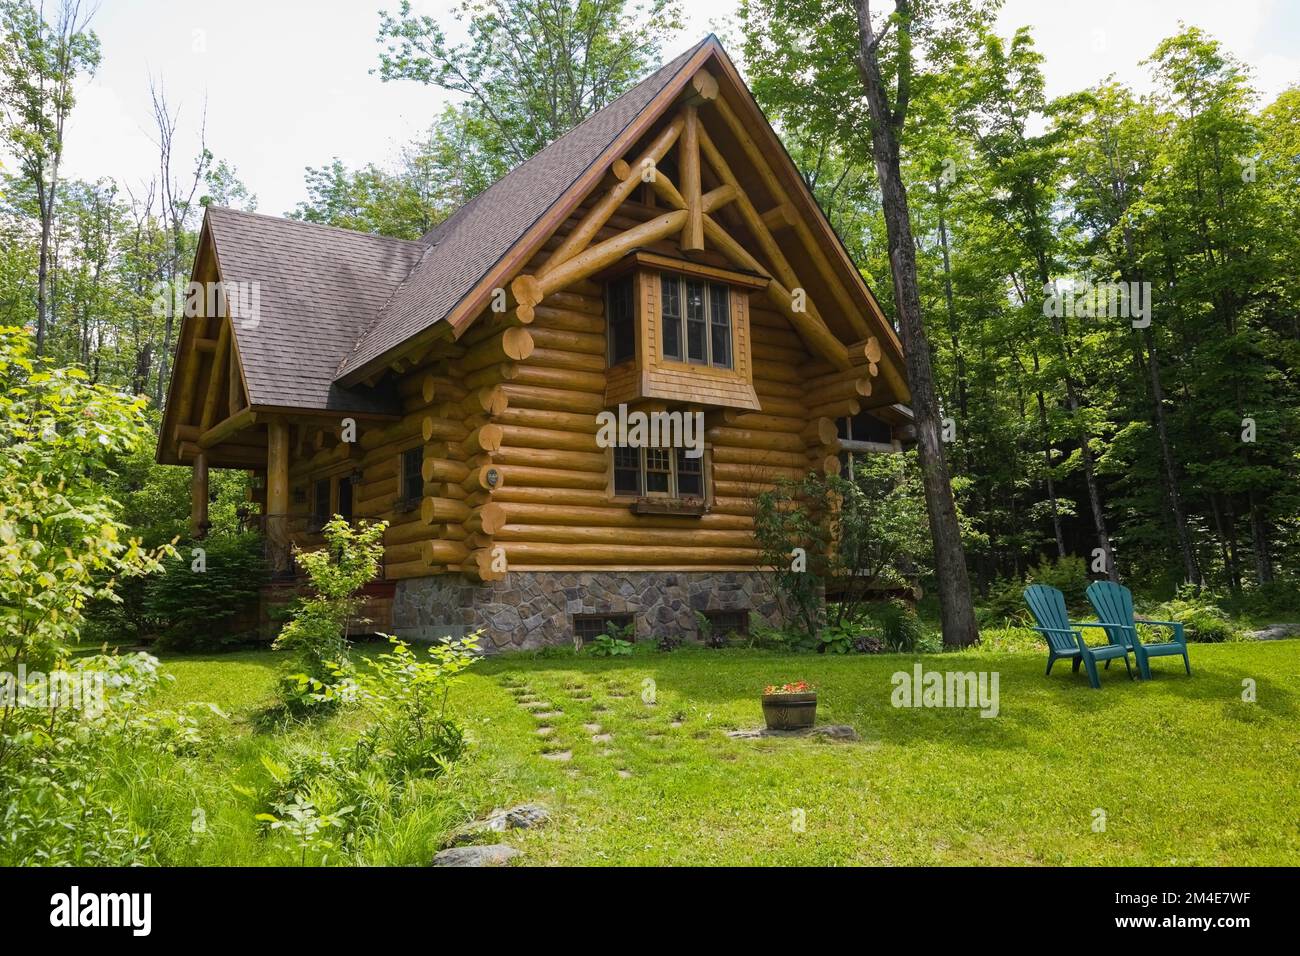 2003 built cottage style log home with brown asphalt shingles roof and natural stone foundation in spring. Stock Photo